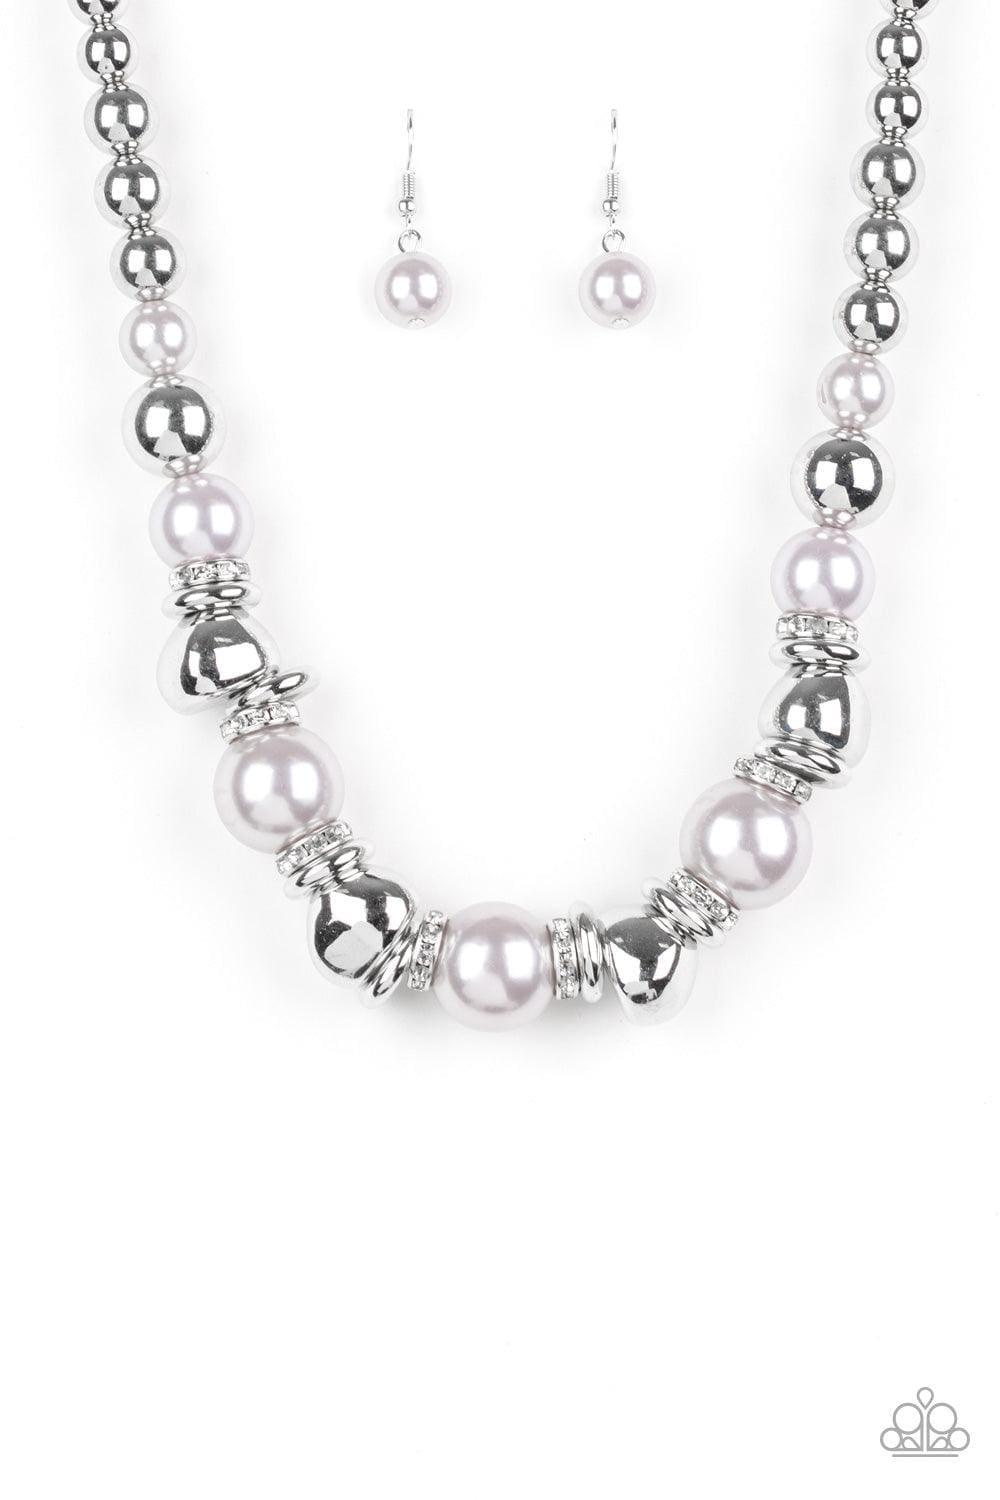 Paparazzi Accessories - Hollywood Haute Spot - Silver Necklace - Bling by JessieK